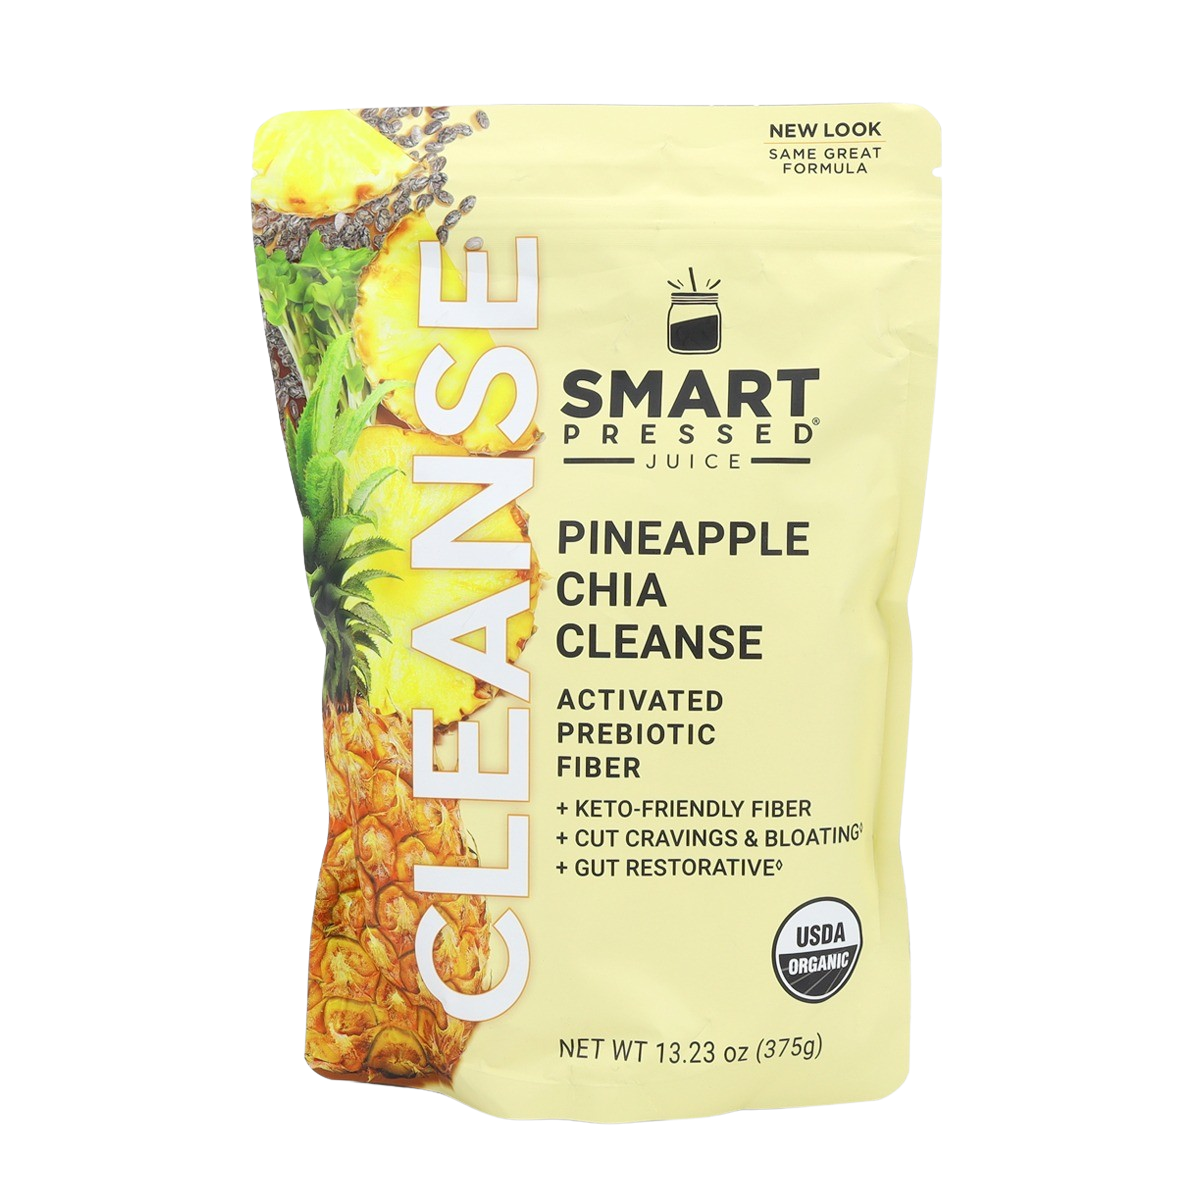 Pineapple Chia Cleanse - Subscription